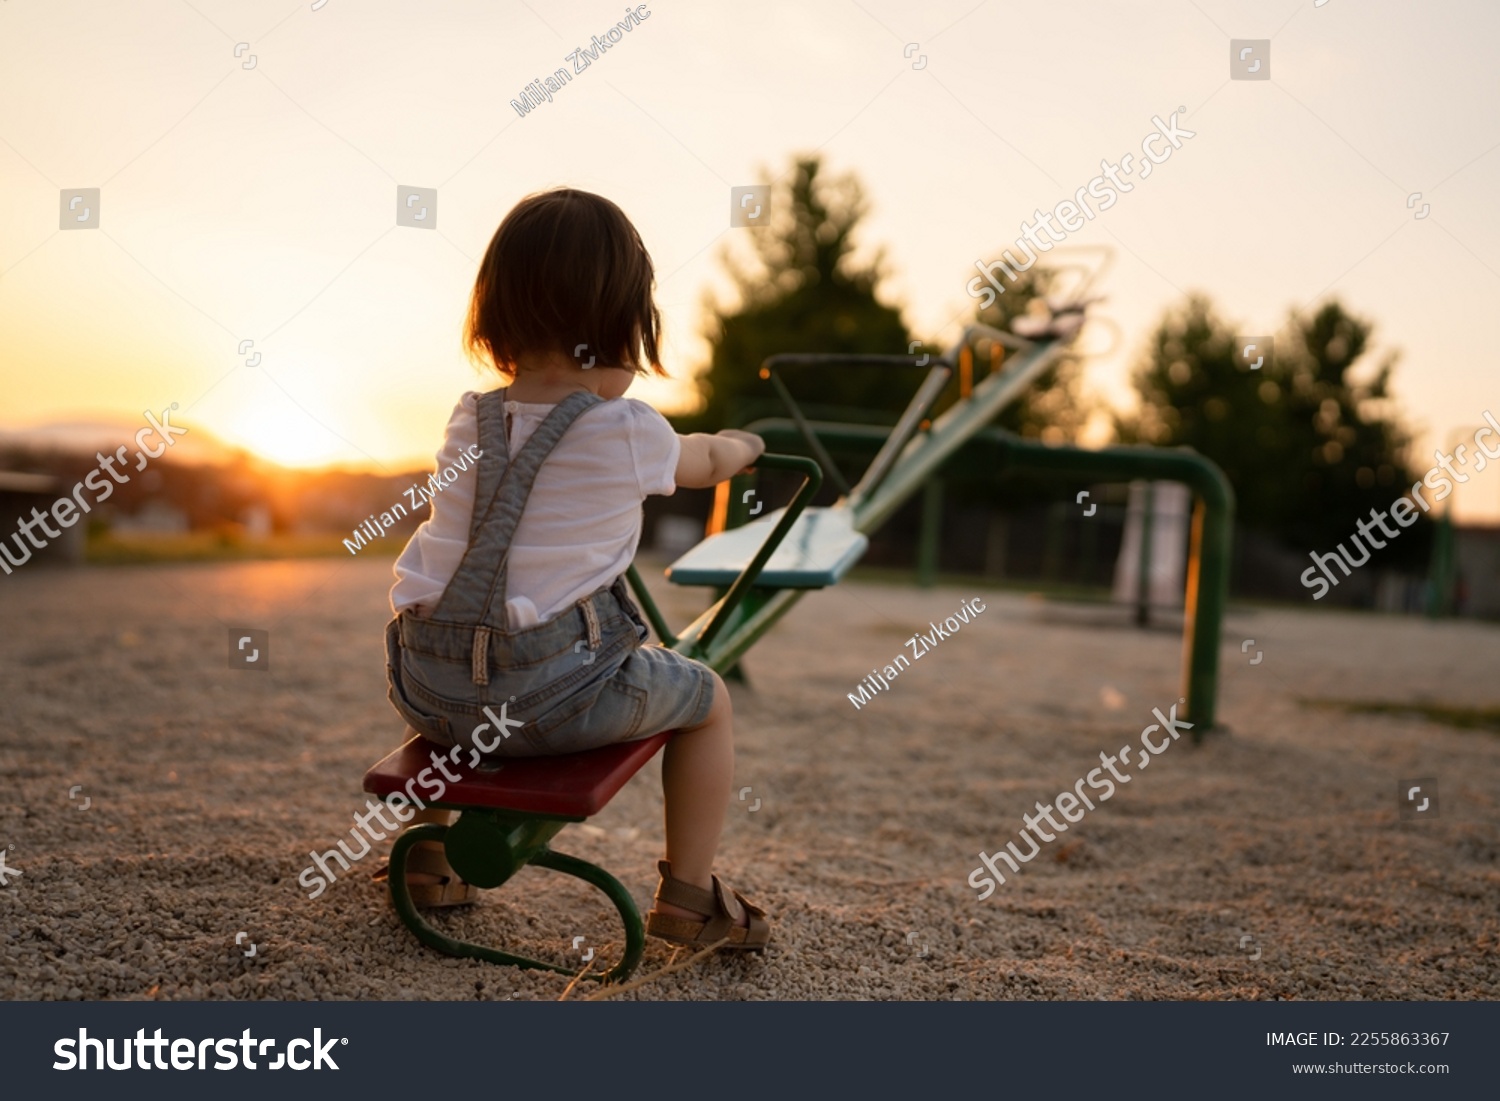 back view of one small caucasian toddler child sitting alone on the seesaw in park in sunset lonely with no friends copy space childhood growing up concept social issues rejected #2255863367